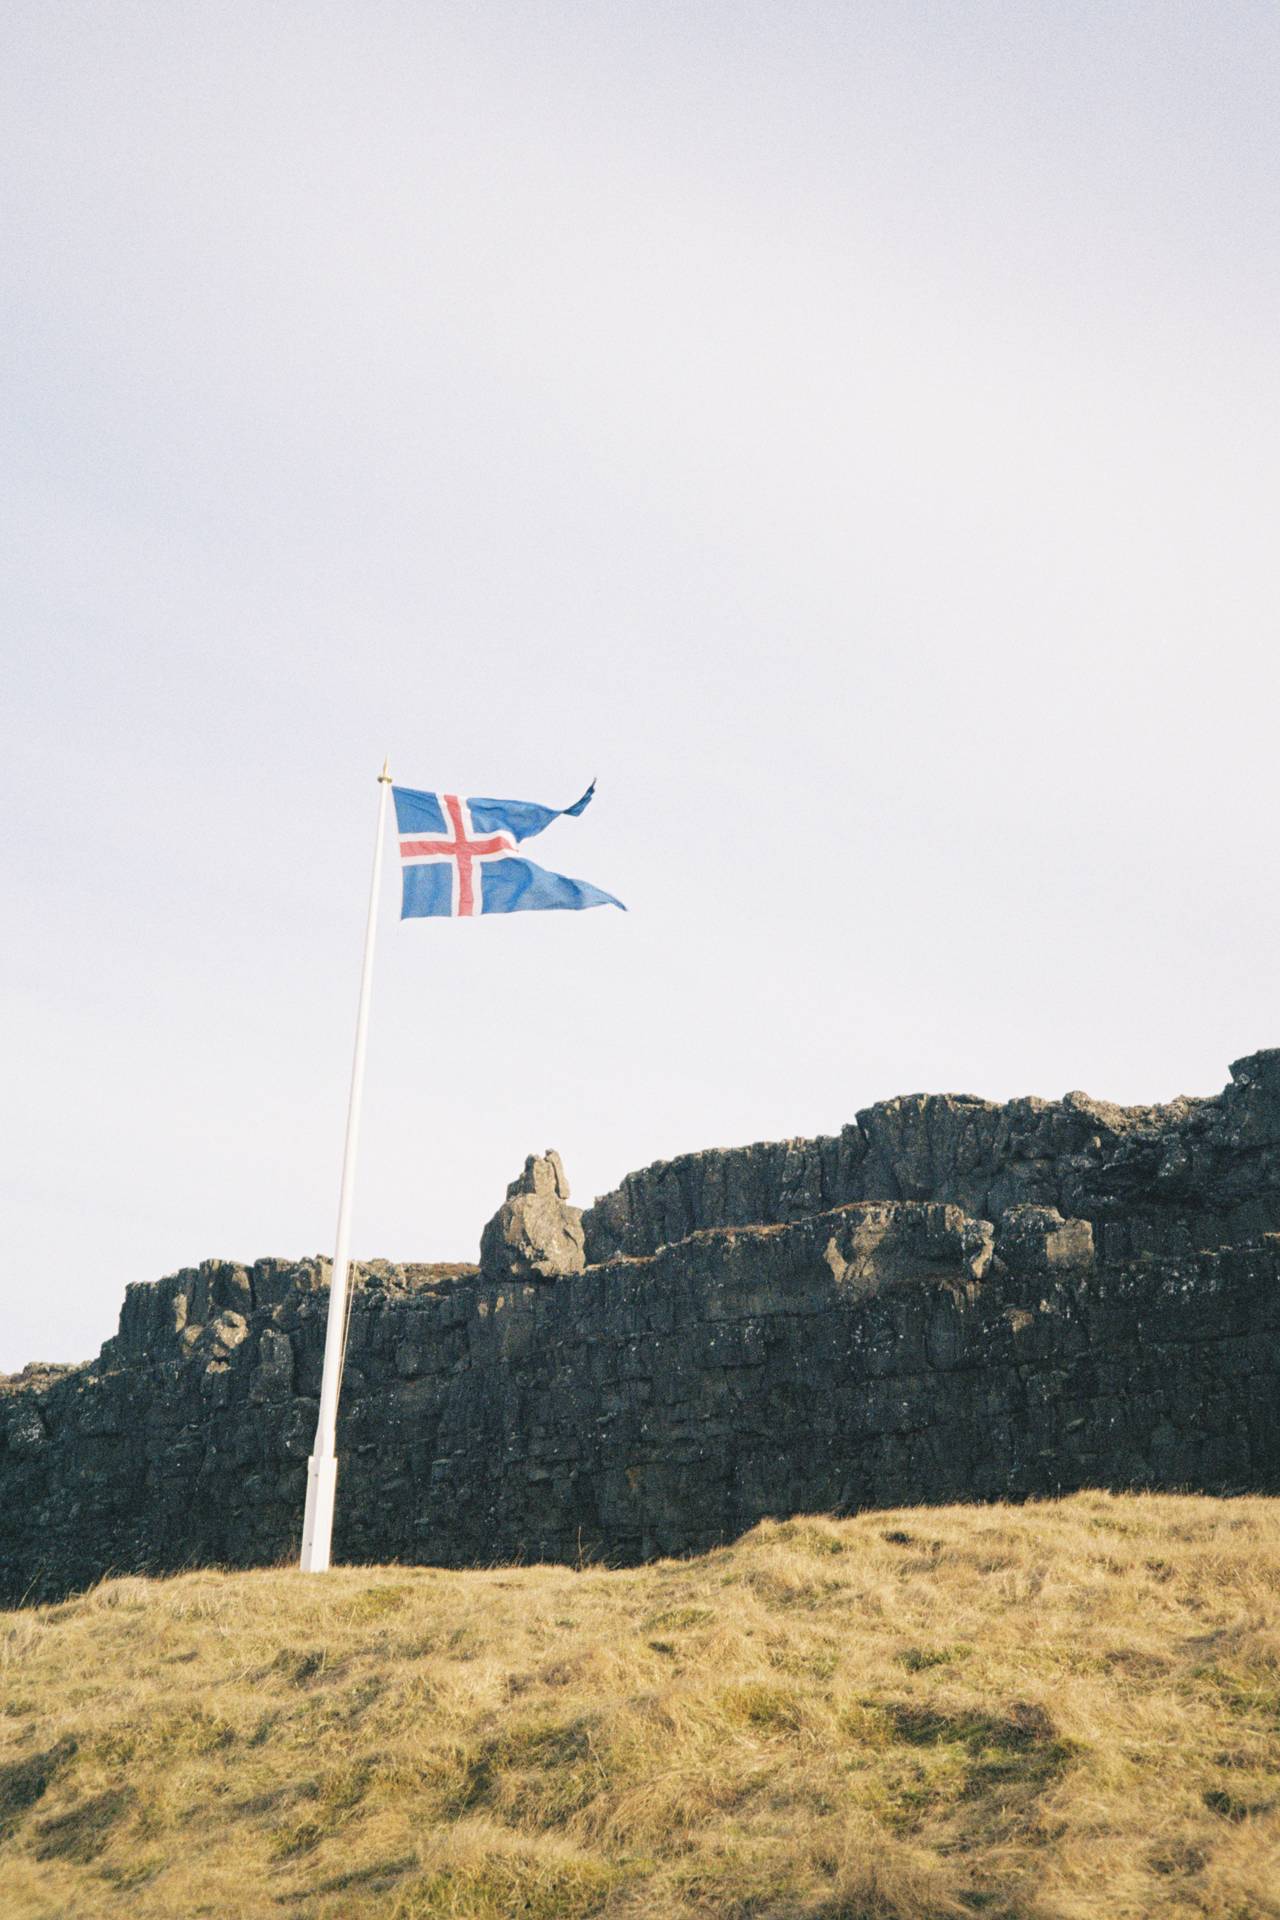 A photograph of the Icelandic flag, shaking in the wind